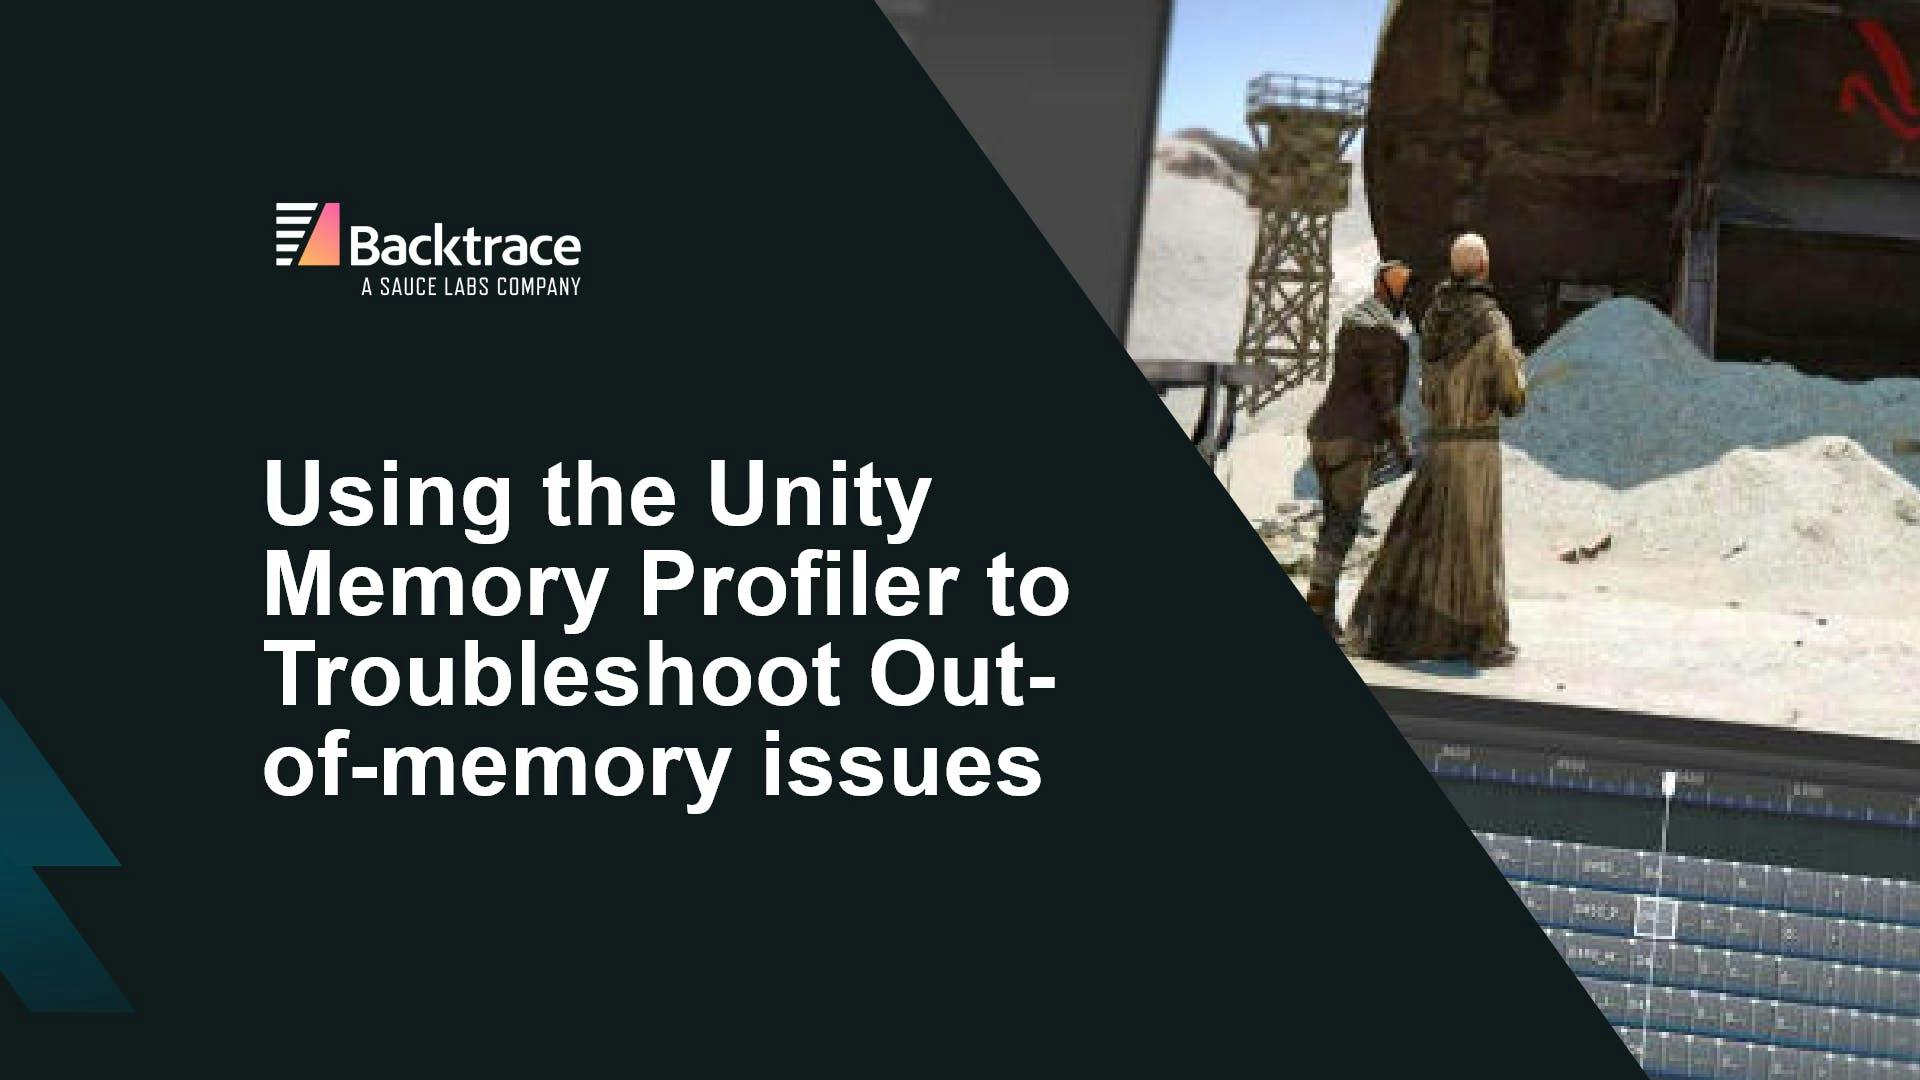 Thumbnail image for blog post: Using the Unity Memory Profiler to Troubleshoot Out-of-memory issues